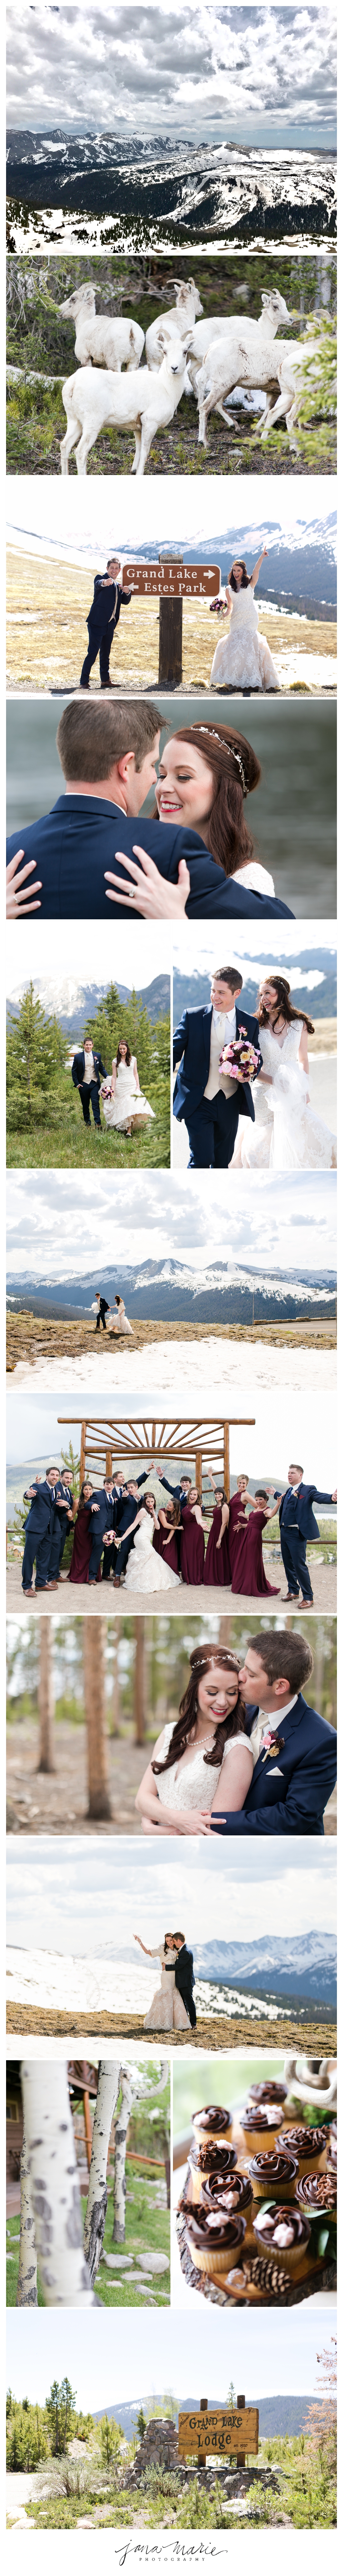 Grand Lake Lodge, Grand Lake Colorado, Colorado weddings, Rocky Mountain Bride, Trail Ridge Road, Mountains, Summer, Fox, Mountain goat, Coker, Walter, Jana Marie Photography, Destination wedding, Yellow Peony, Festive.ly, Mias Bridal and Tailoring, DJ Connections, Banana Who? Booth, Traci Morby Styling, St. Anne's Catholic Church, Bridal Solutions